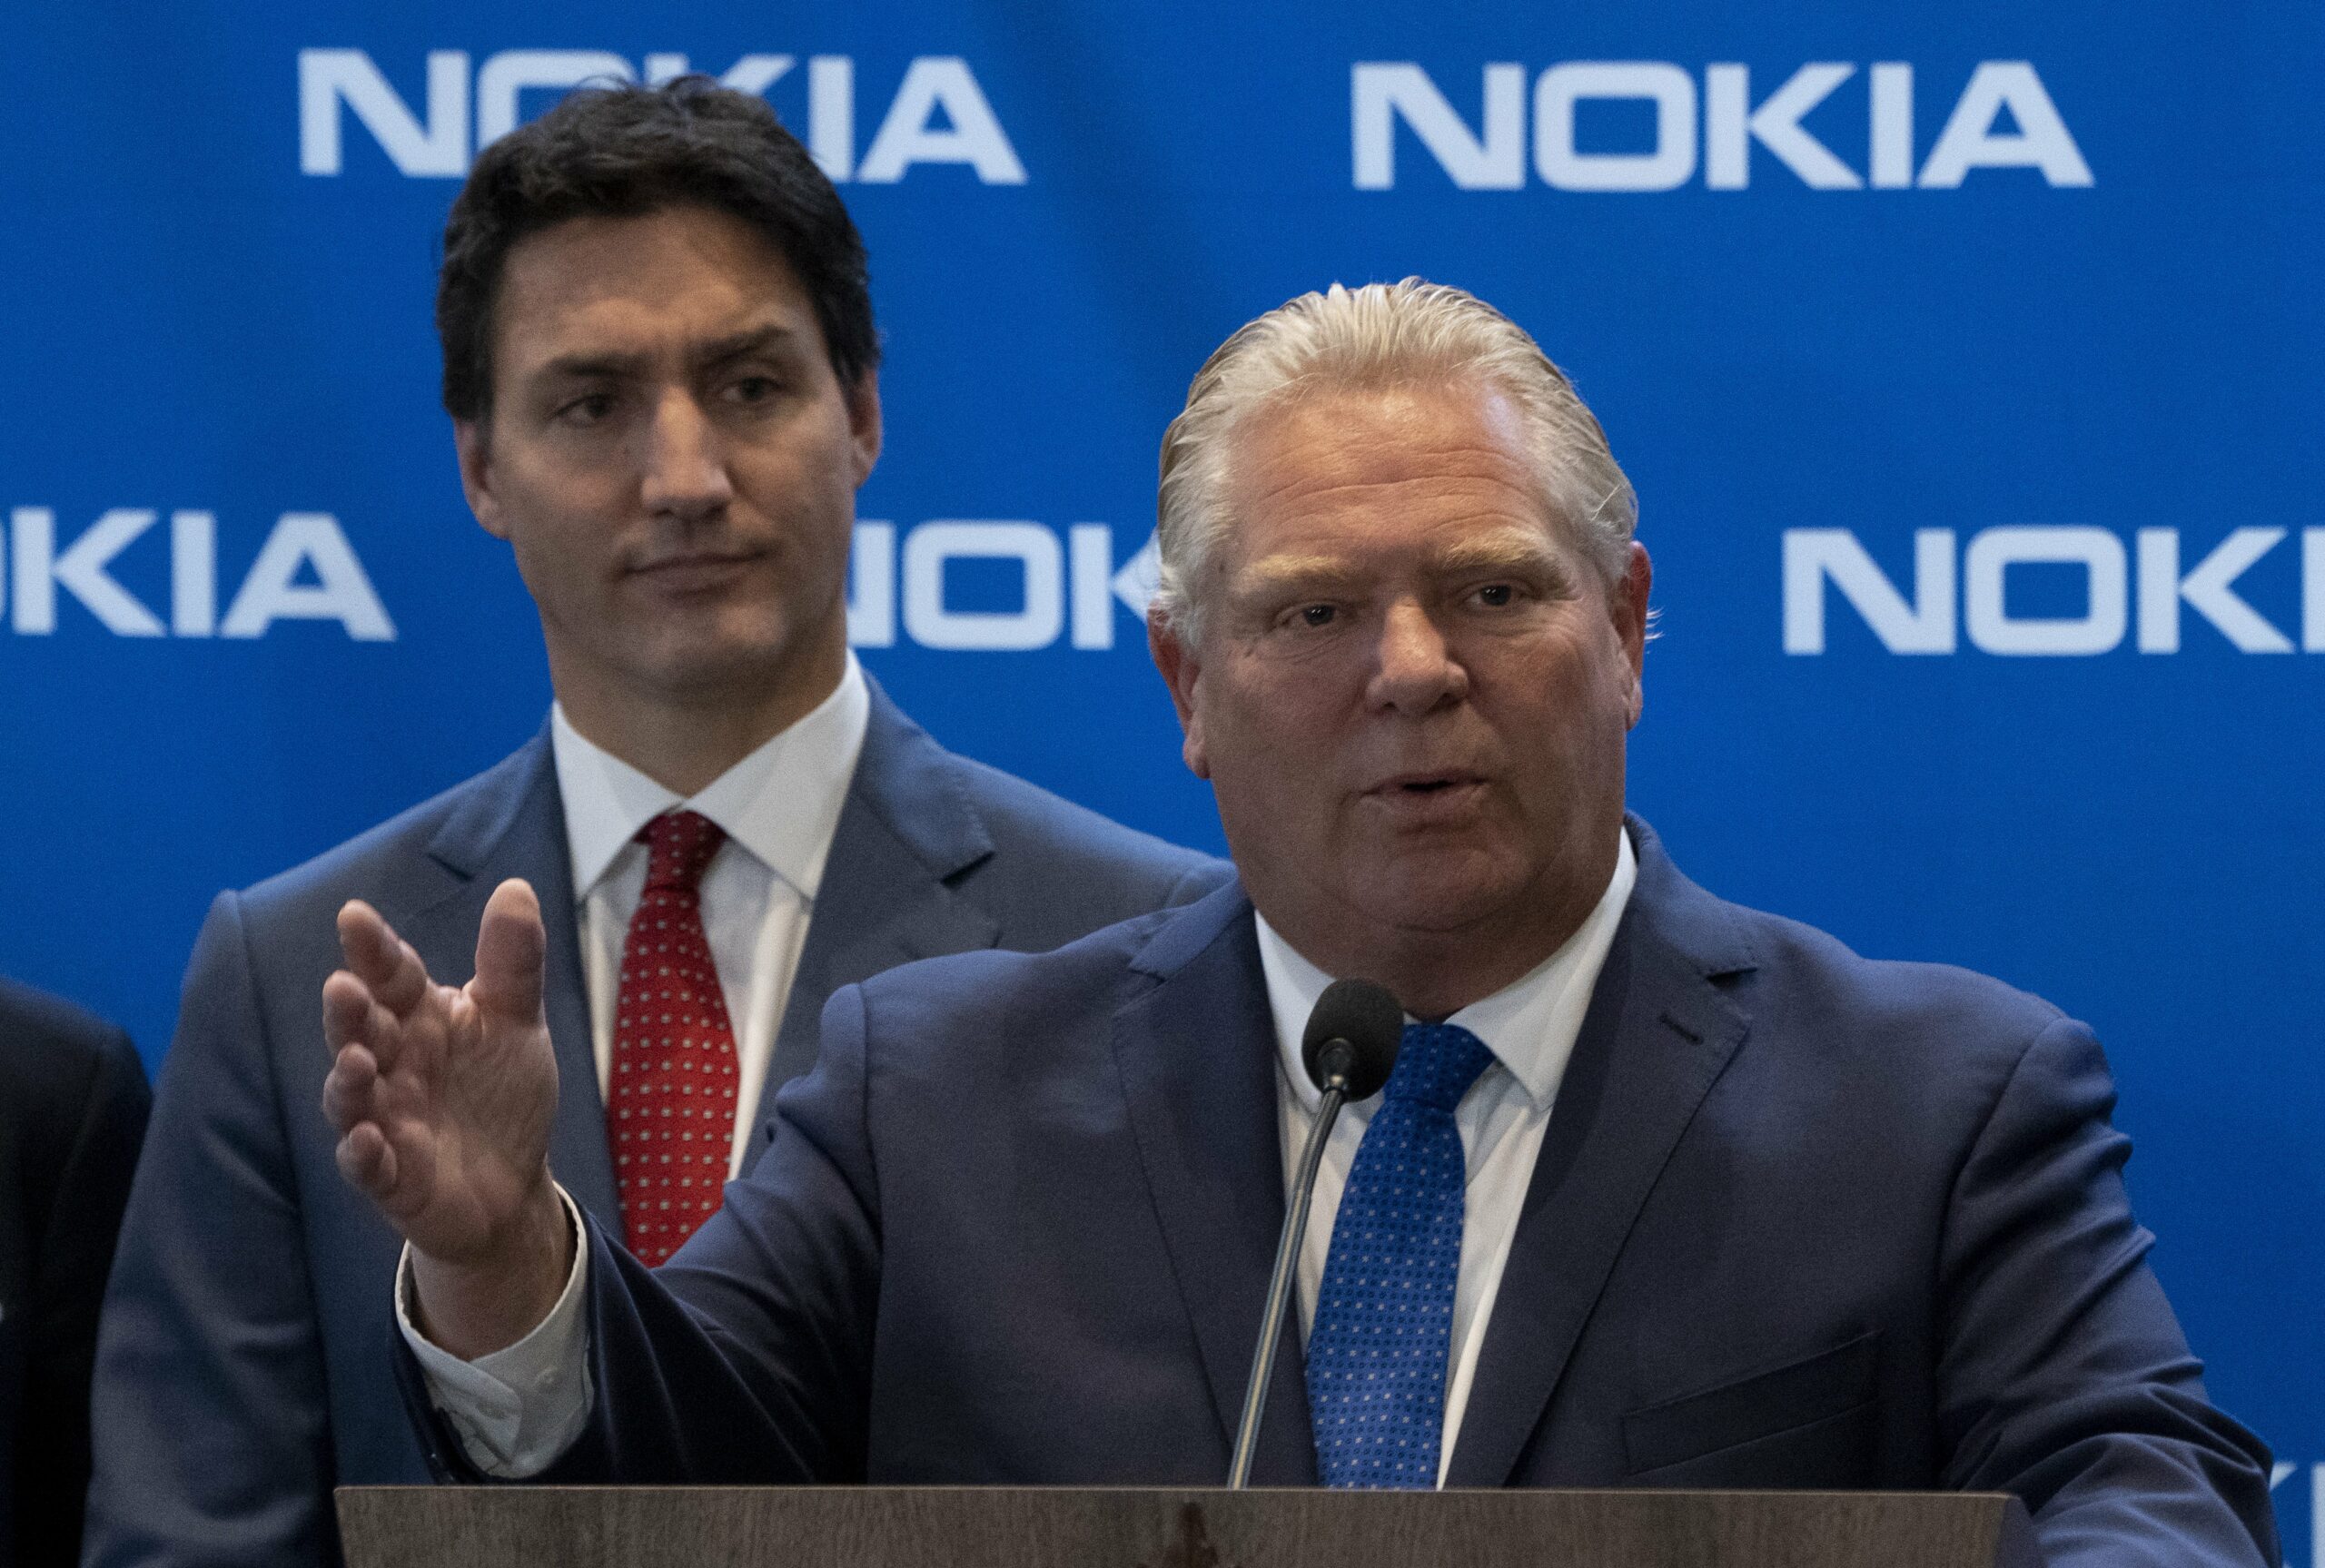 'I stood shoulder to shoulder with the prime minister' on Emergencies Act: Ford